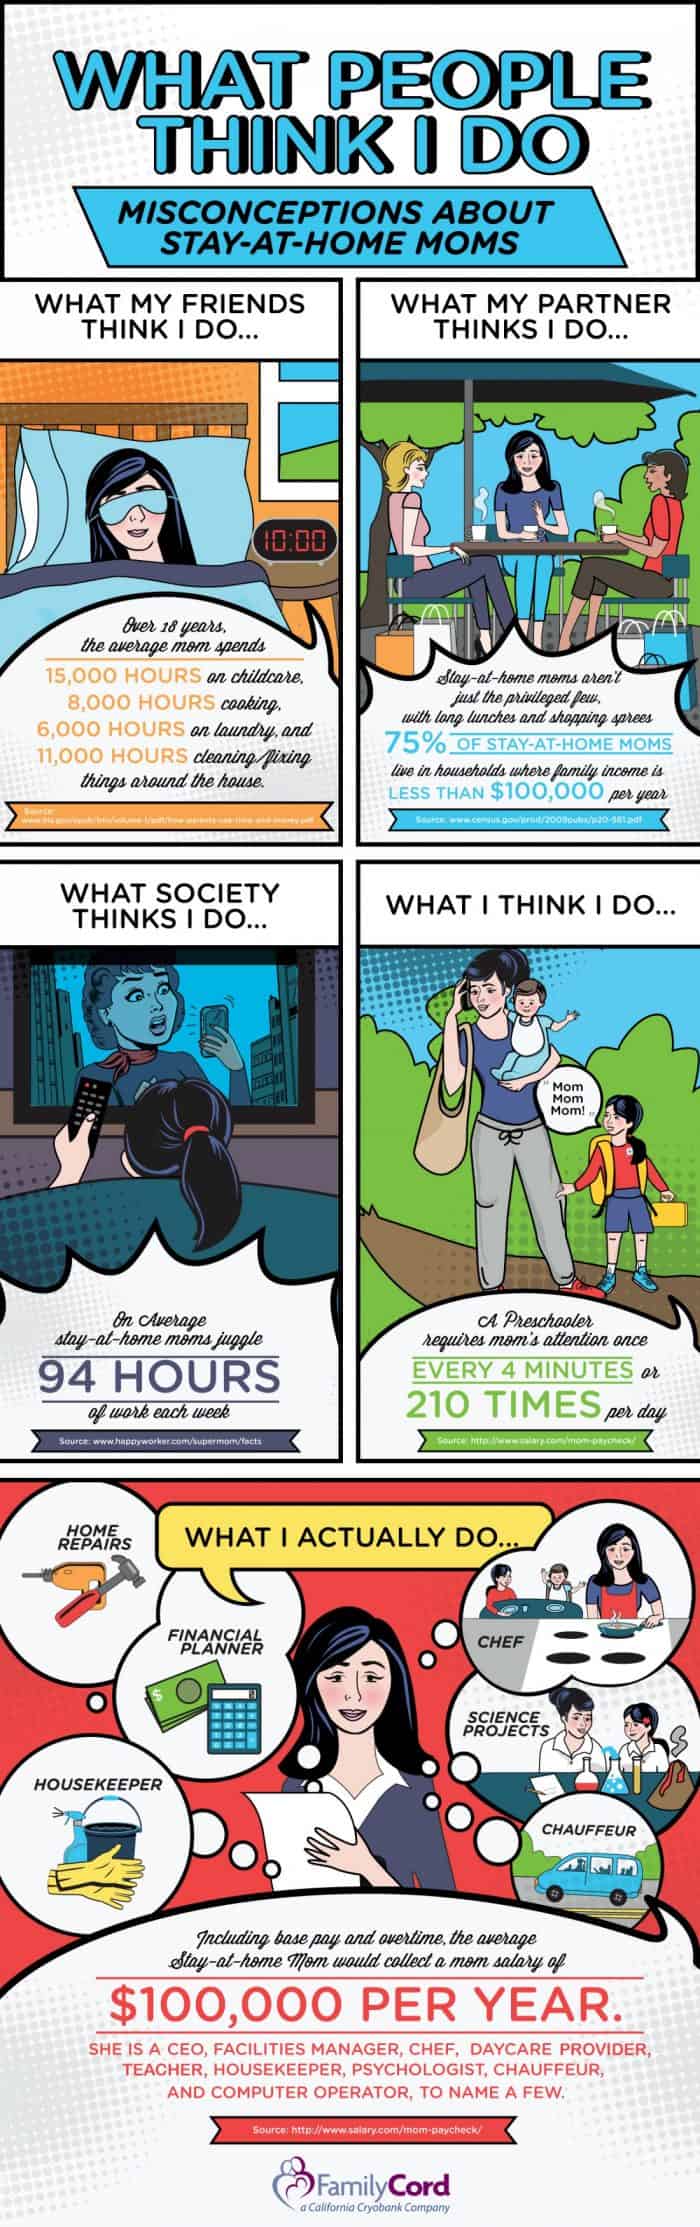 Misconceptions About Stay-At-Home Parents according to society infographic